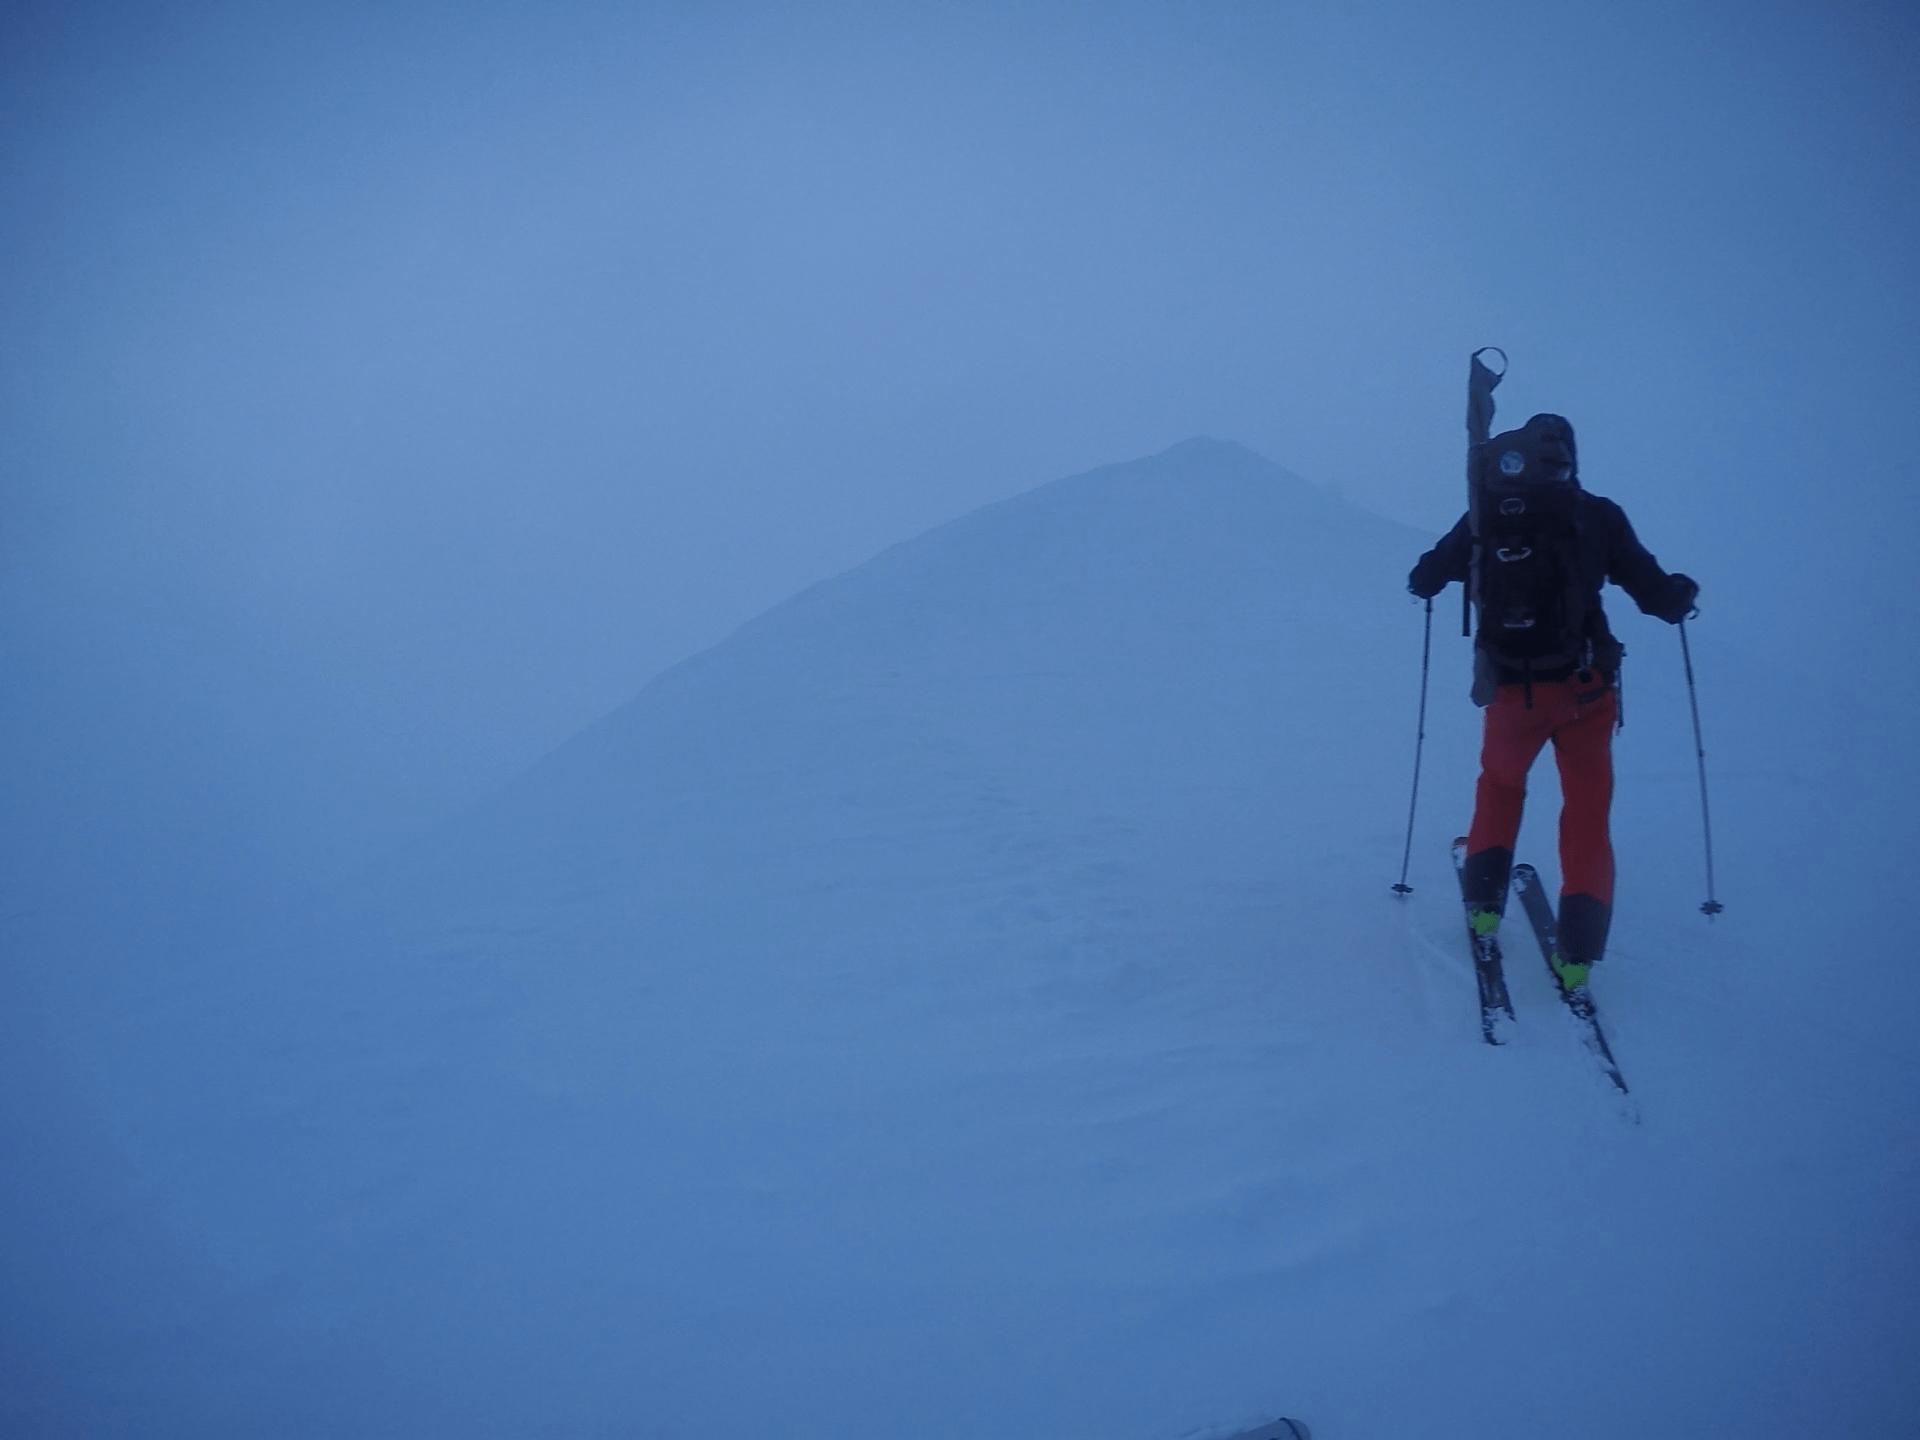 Person skiing in low-lighting